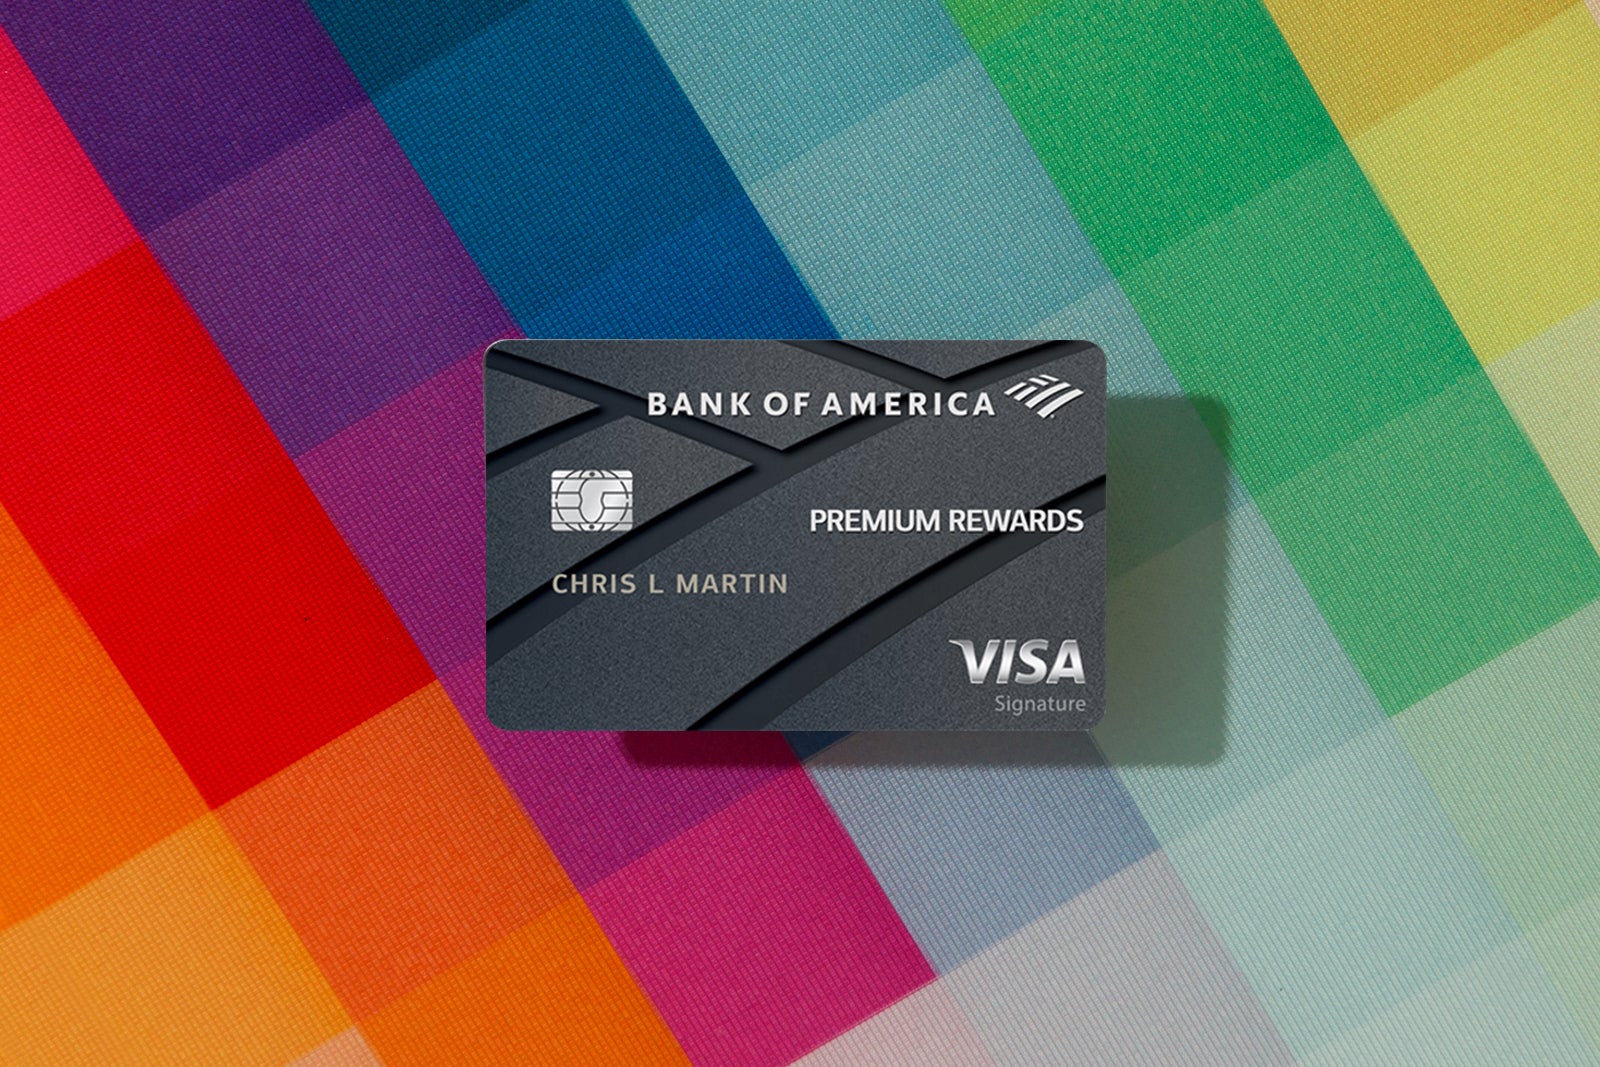 How to redeem points using the BofA Premium Rewards card